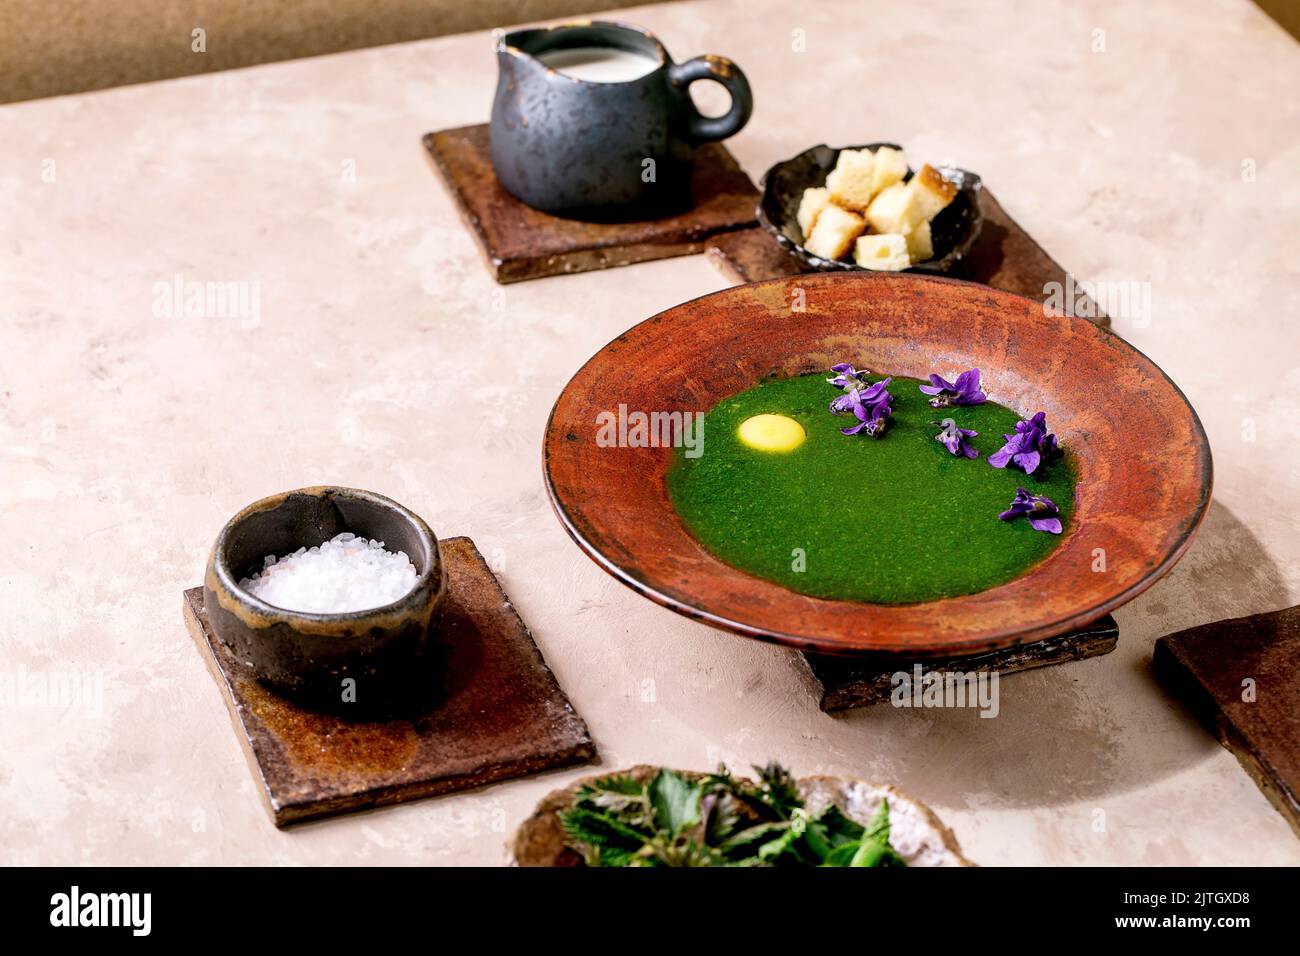 Plate of spring herbal nettle puree soup, served with quail yolk, violettes flowers, cream, croutons and young nettle leaves on brown ceramic tiles. P Stock Photo